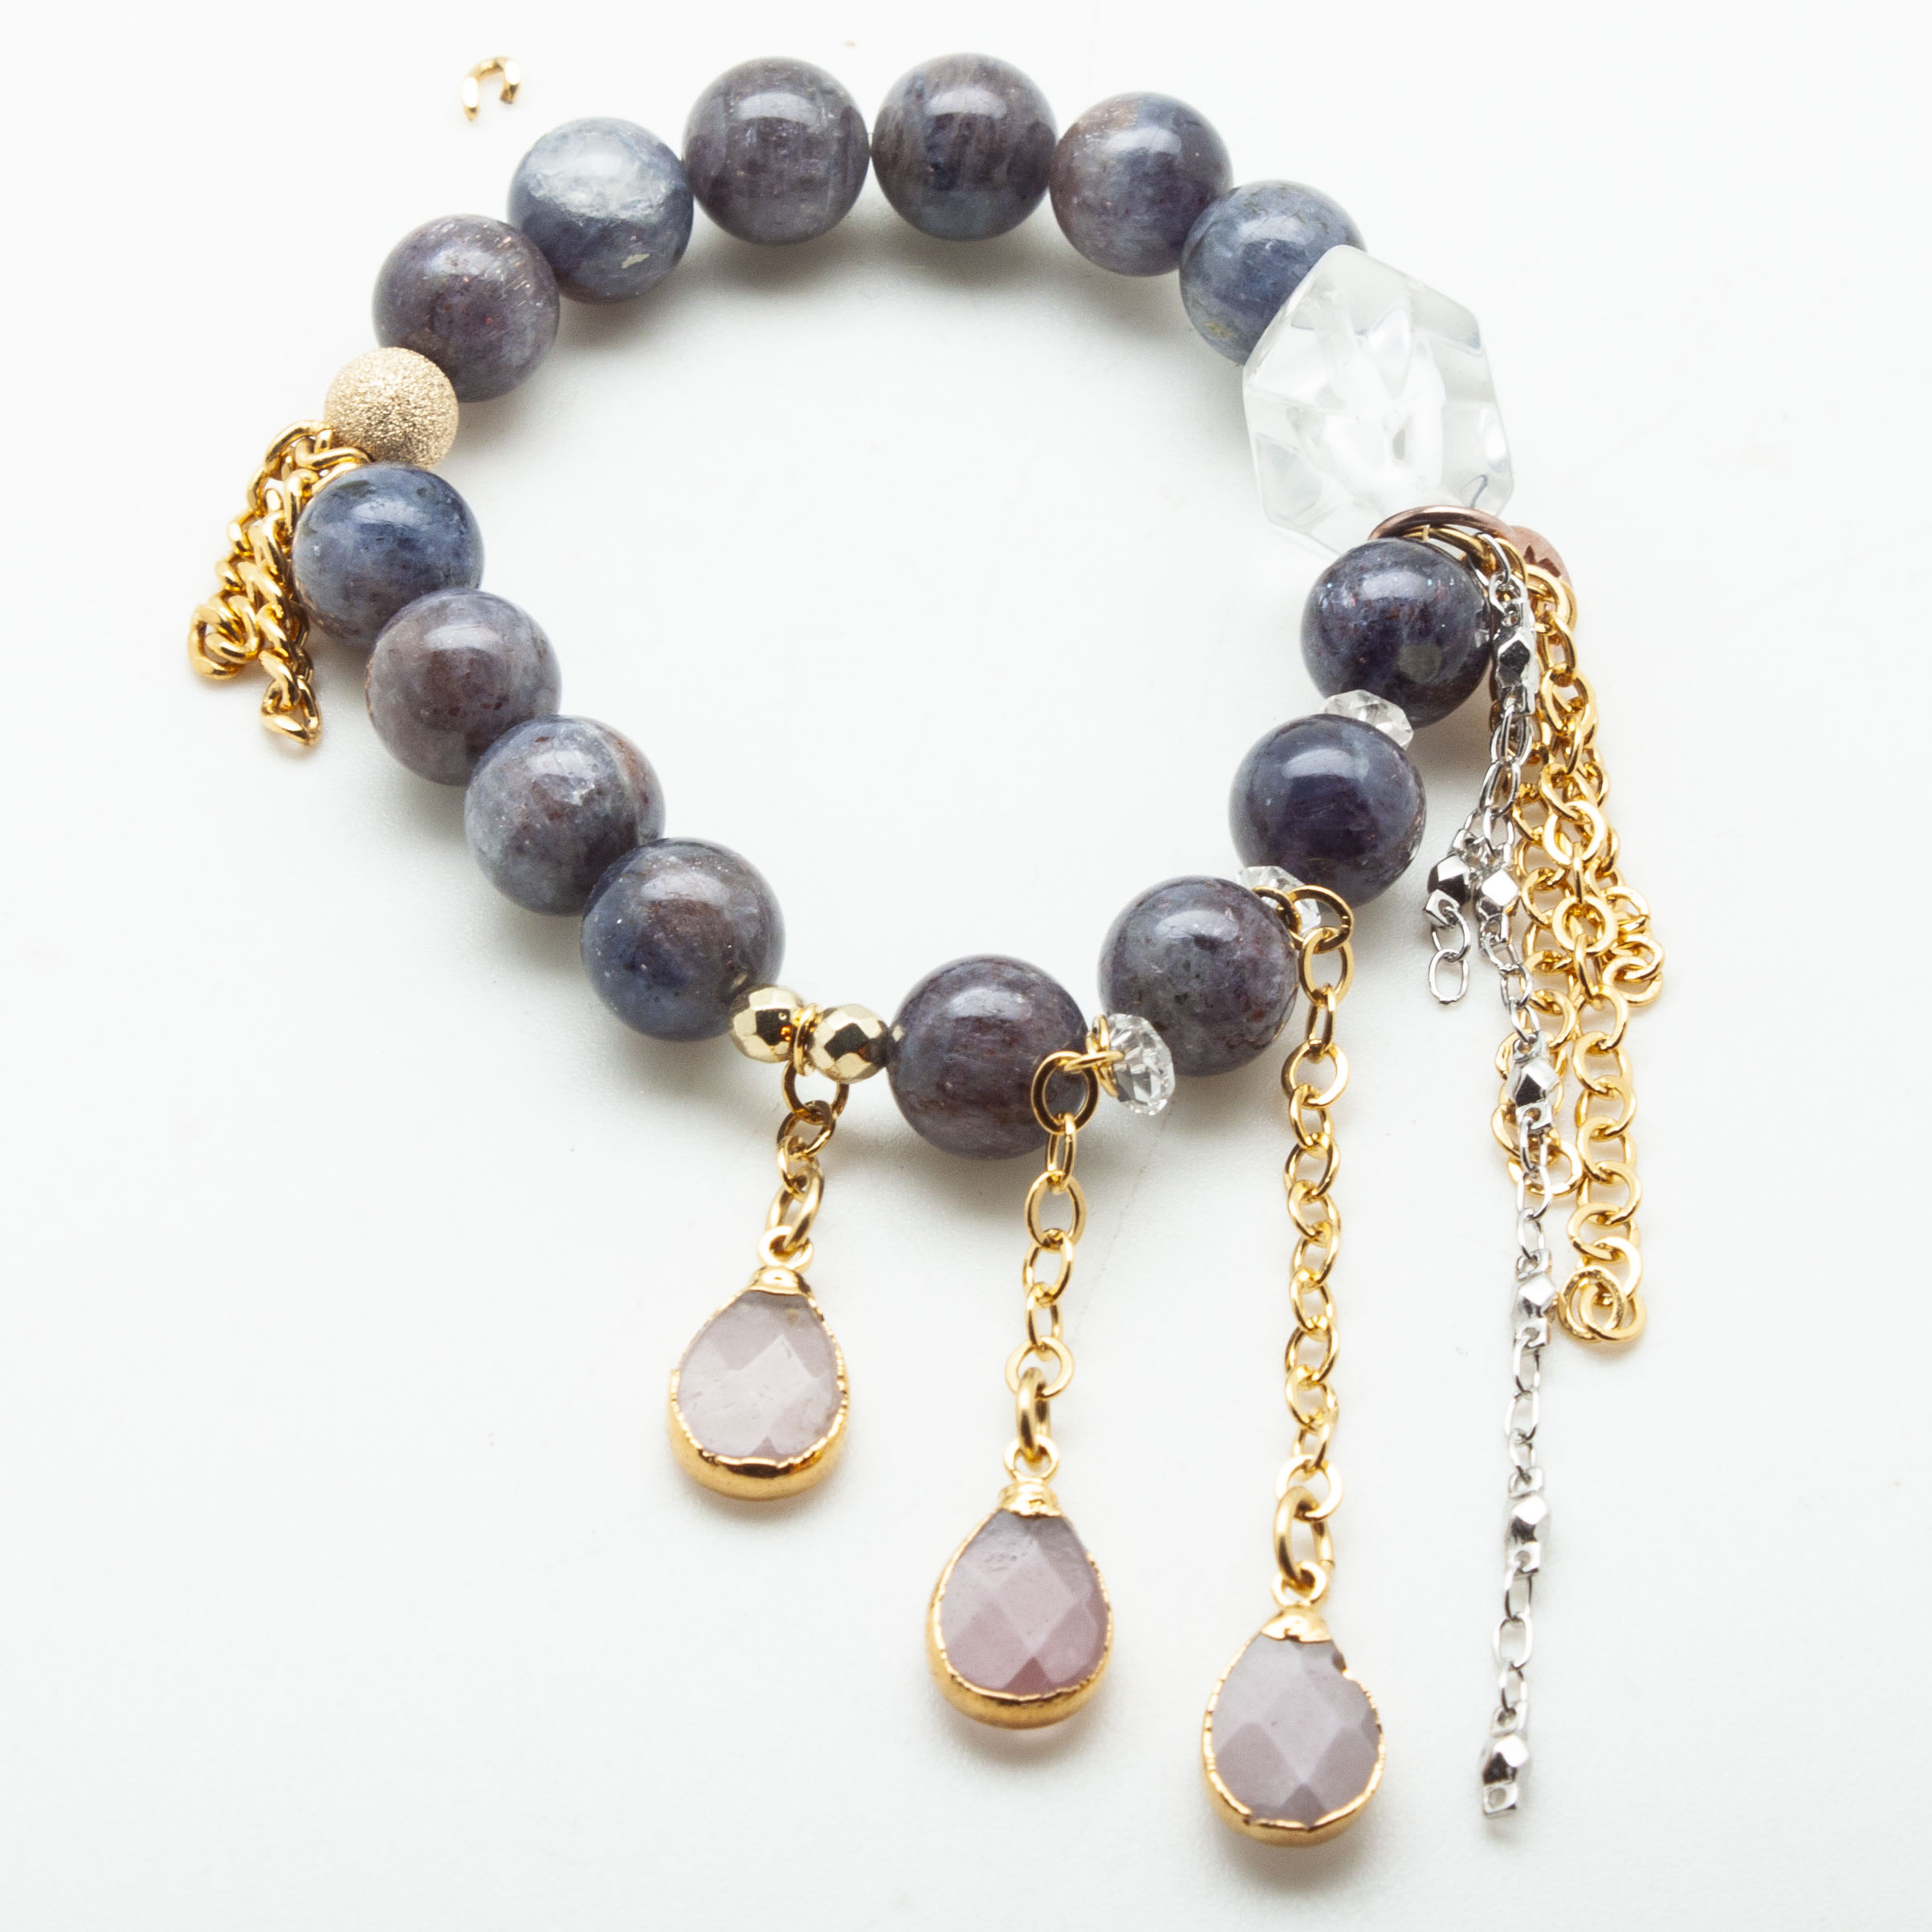 Star Iolite with a Rose Quartz Waterfall